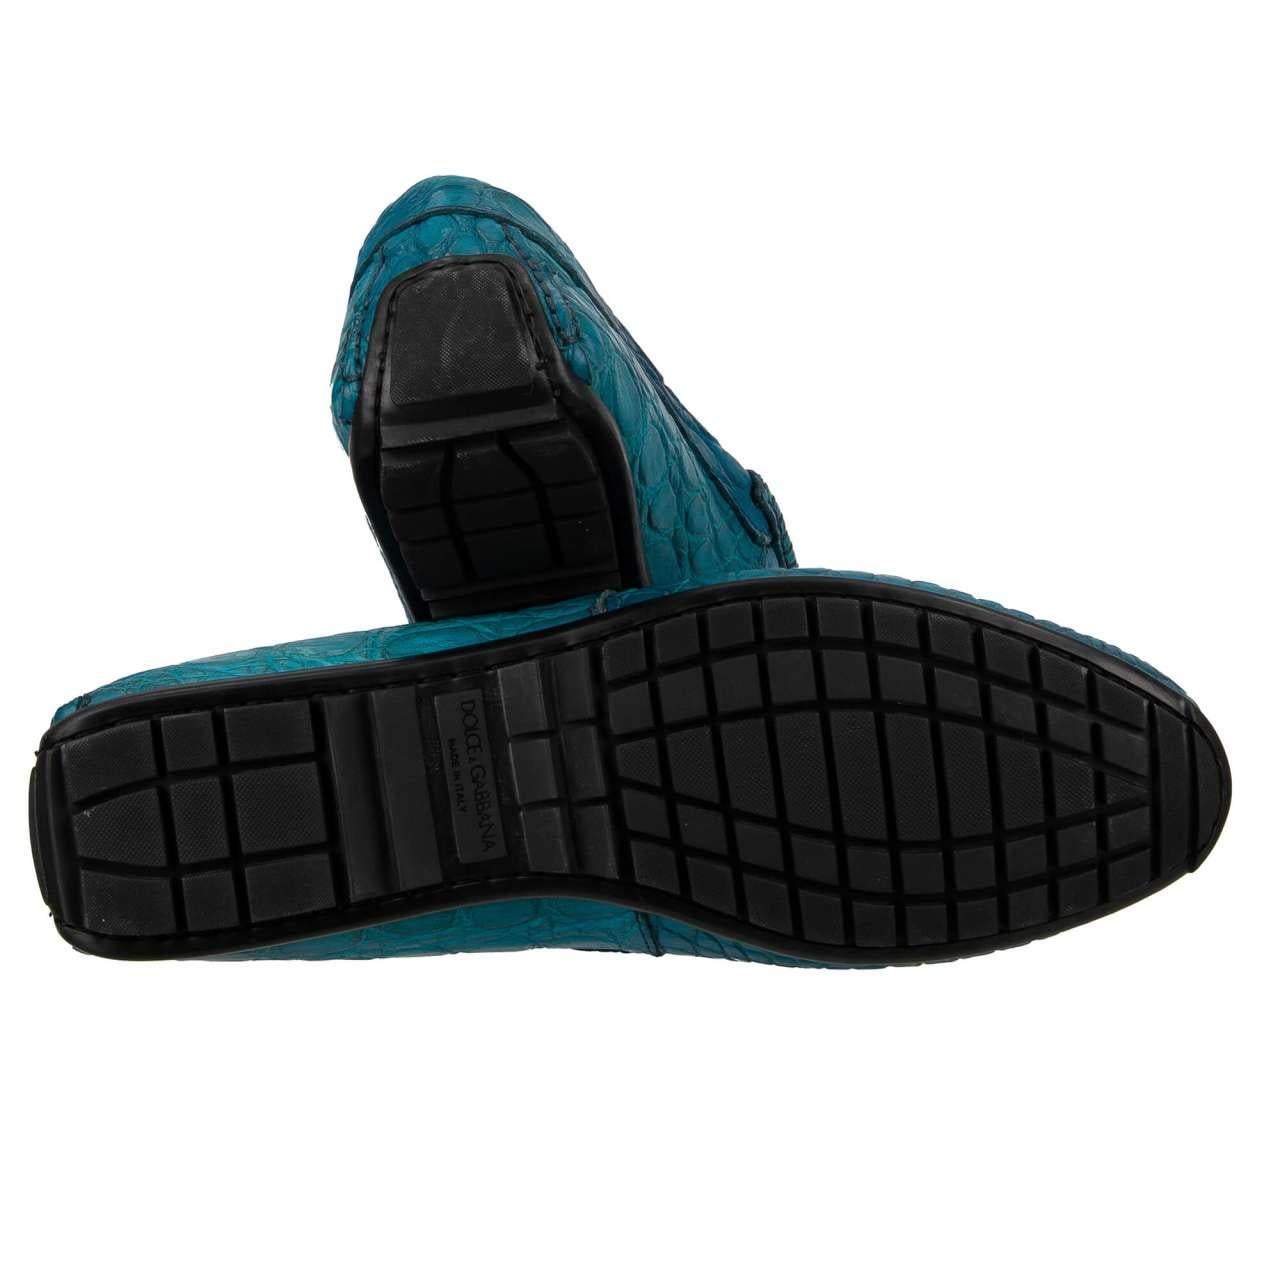 D&G - Caiman Leather Moccasins Loafer Shoes RAGUSA Turquoise Blue EUR 40 For Sale 3